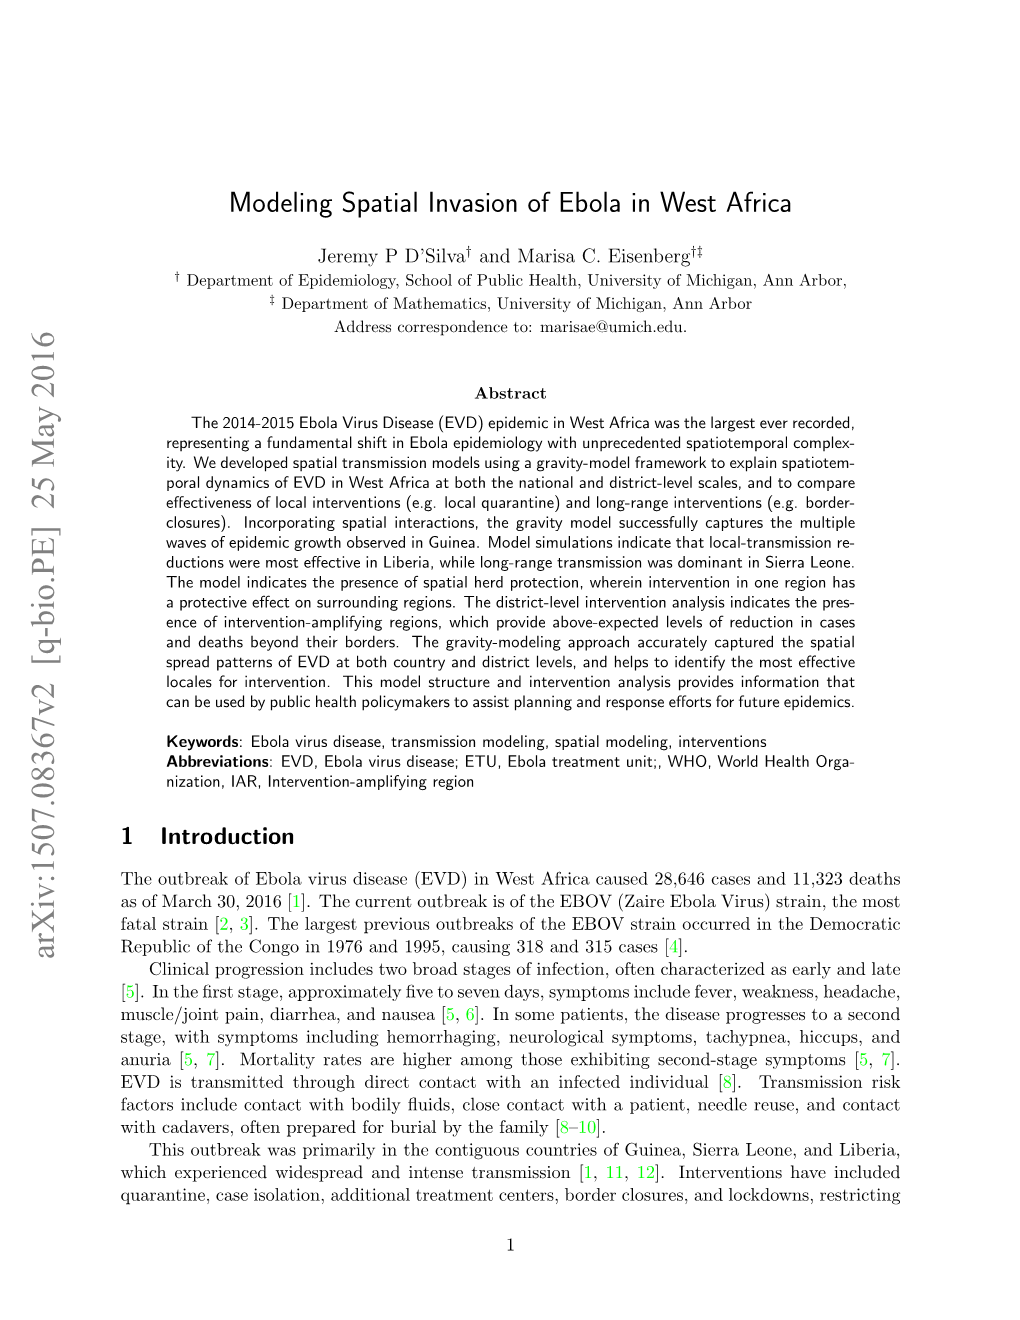 Modeling Spatial Invasion of Ebola in West Africa